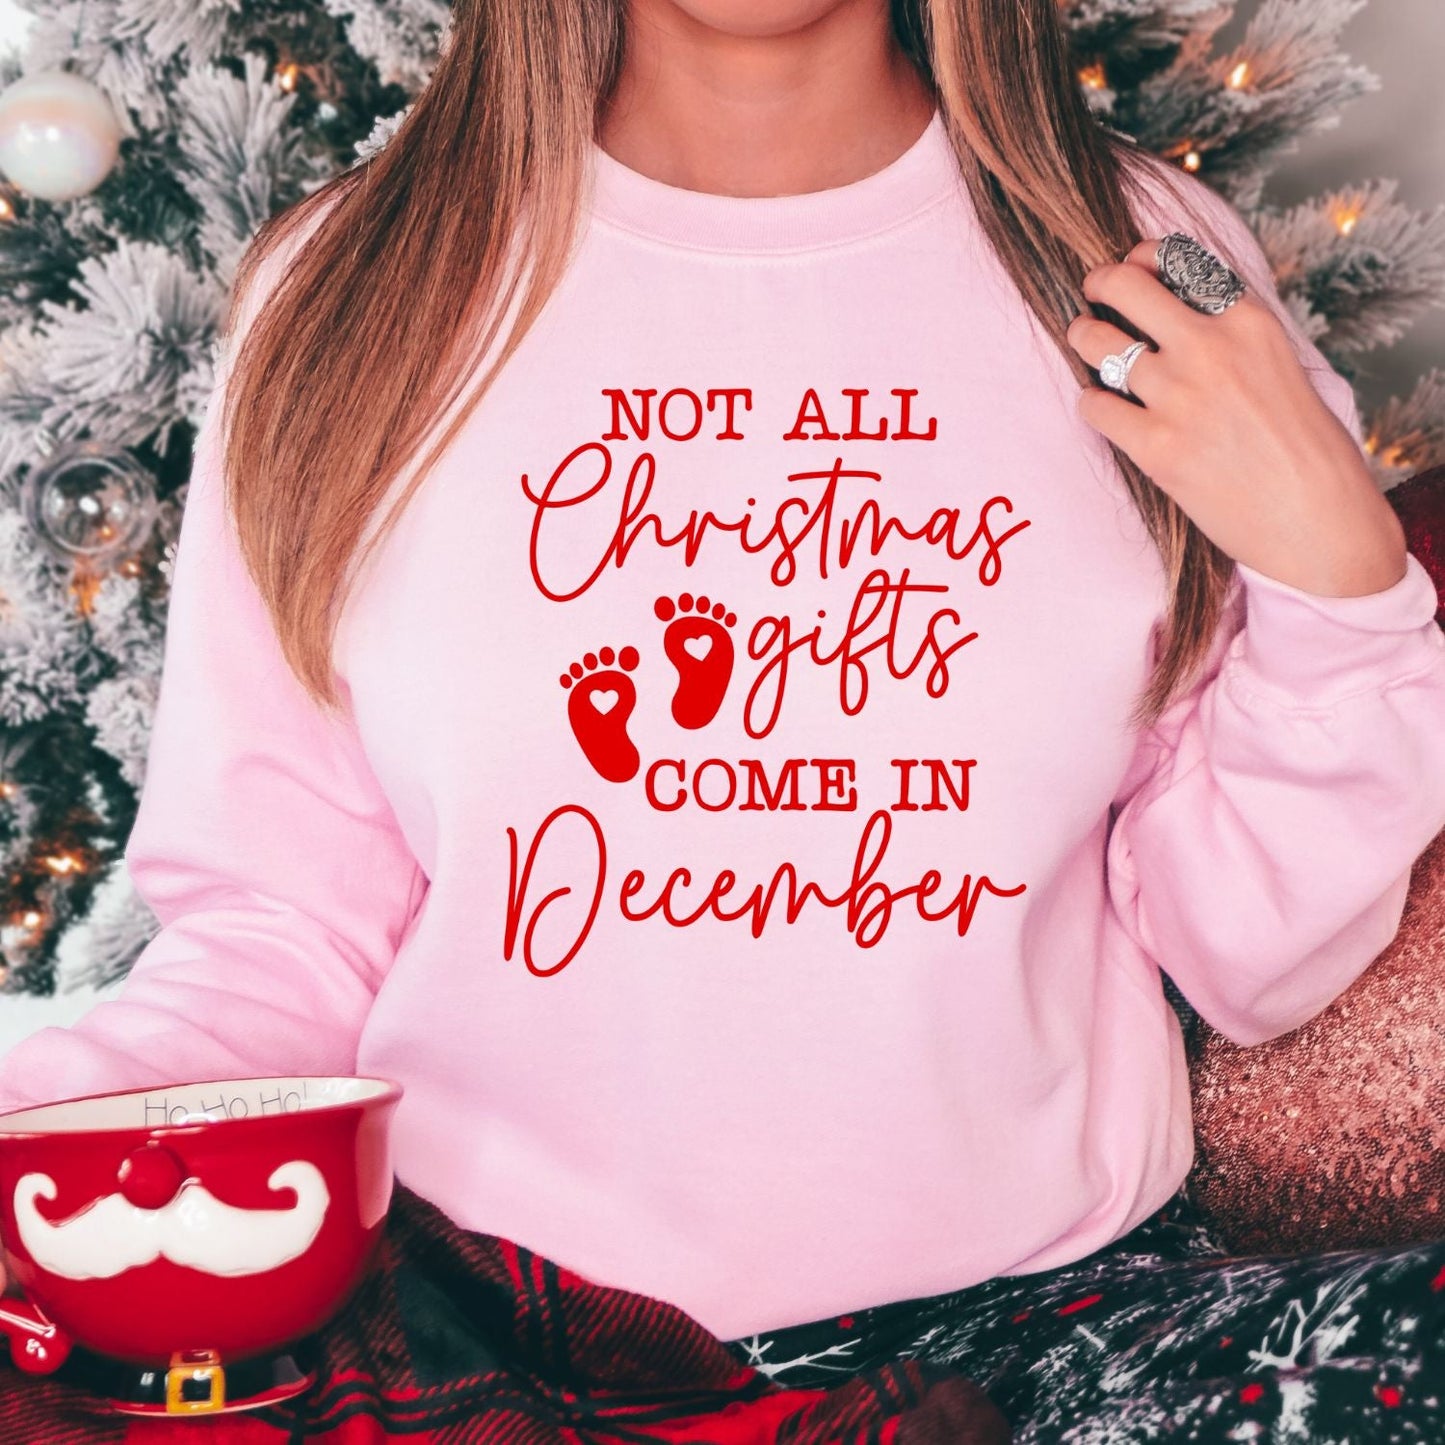 Not All Christmas Gifts Come in December Sweatshirt